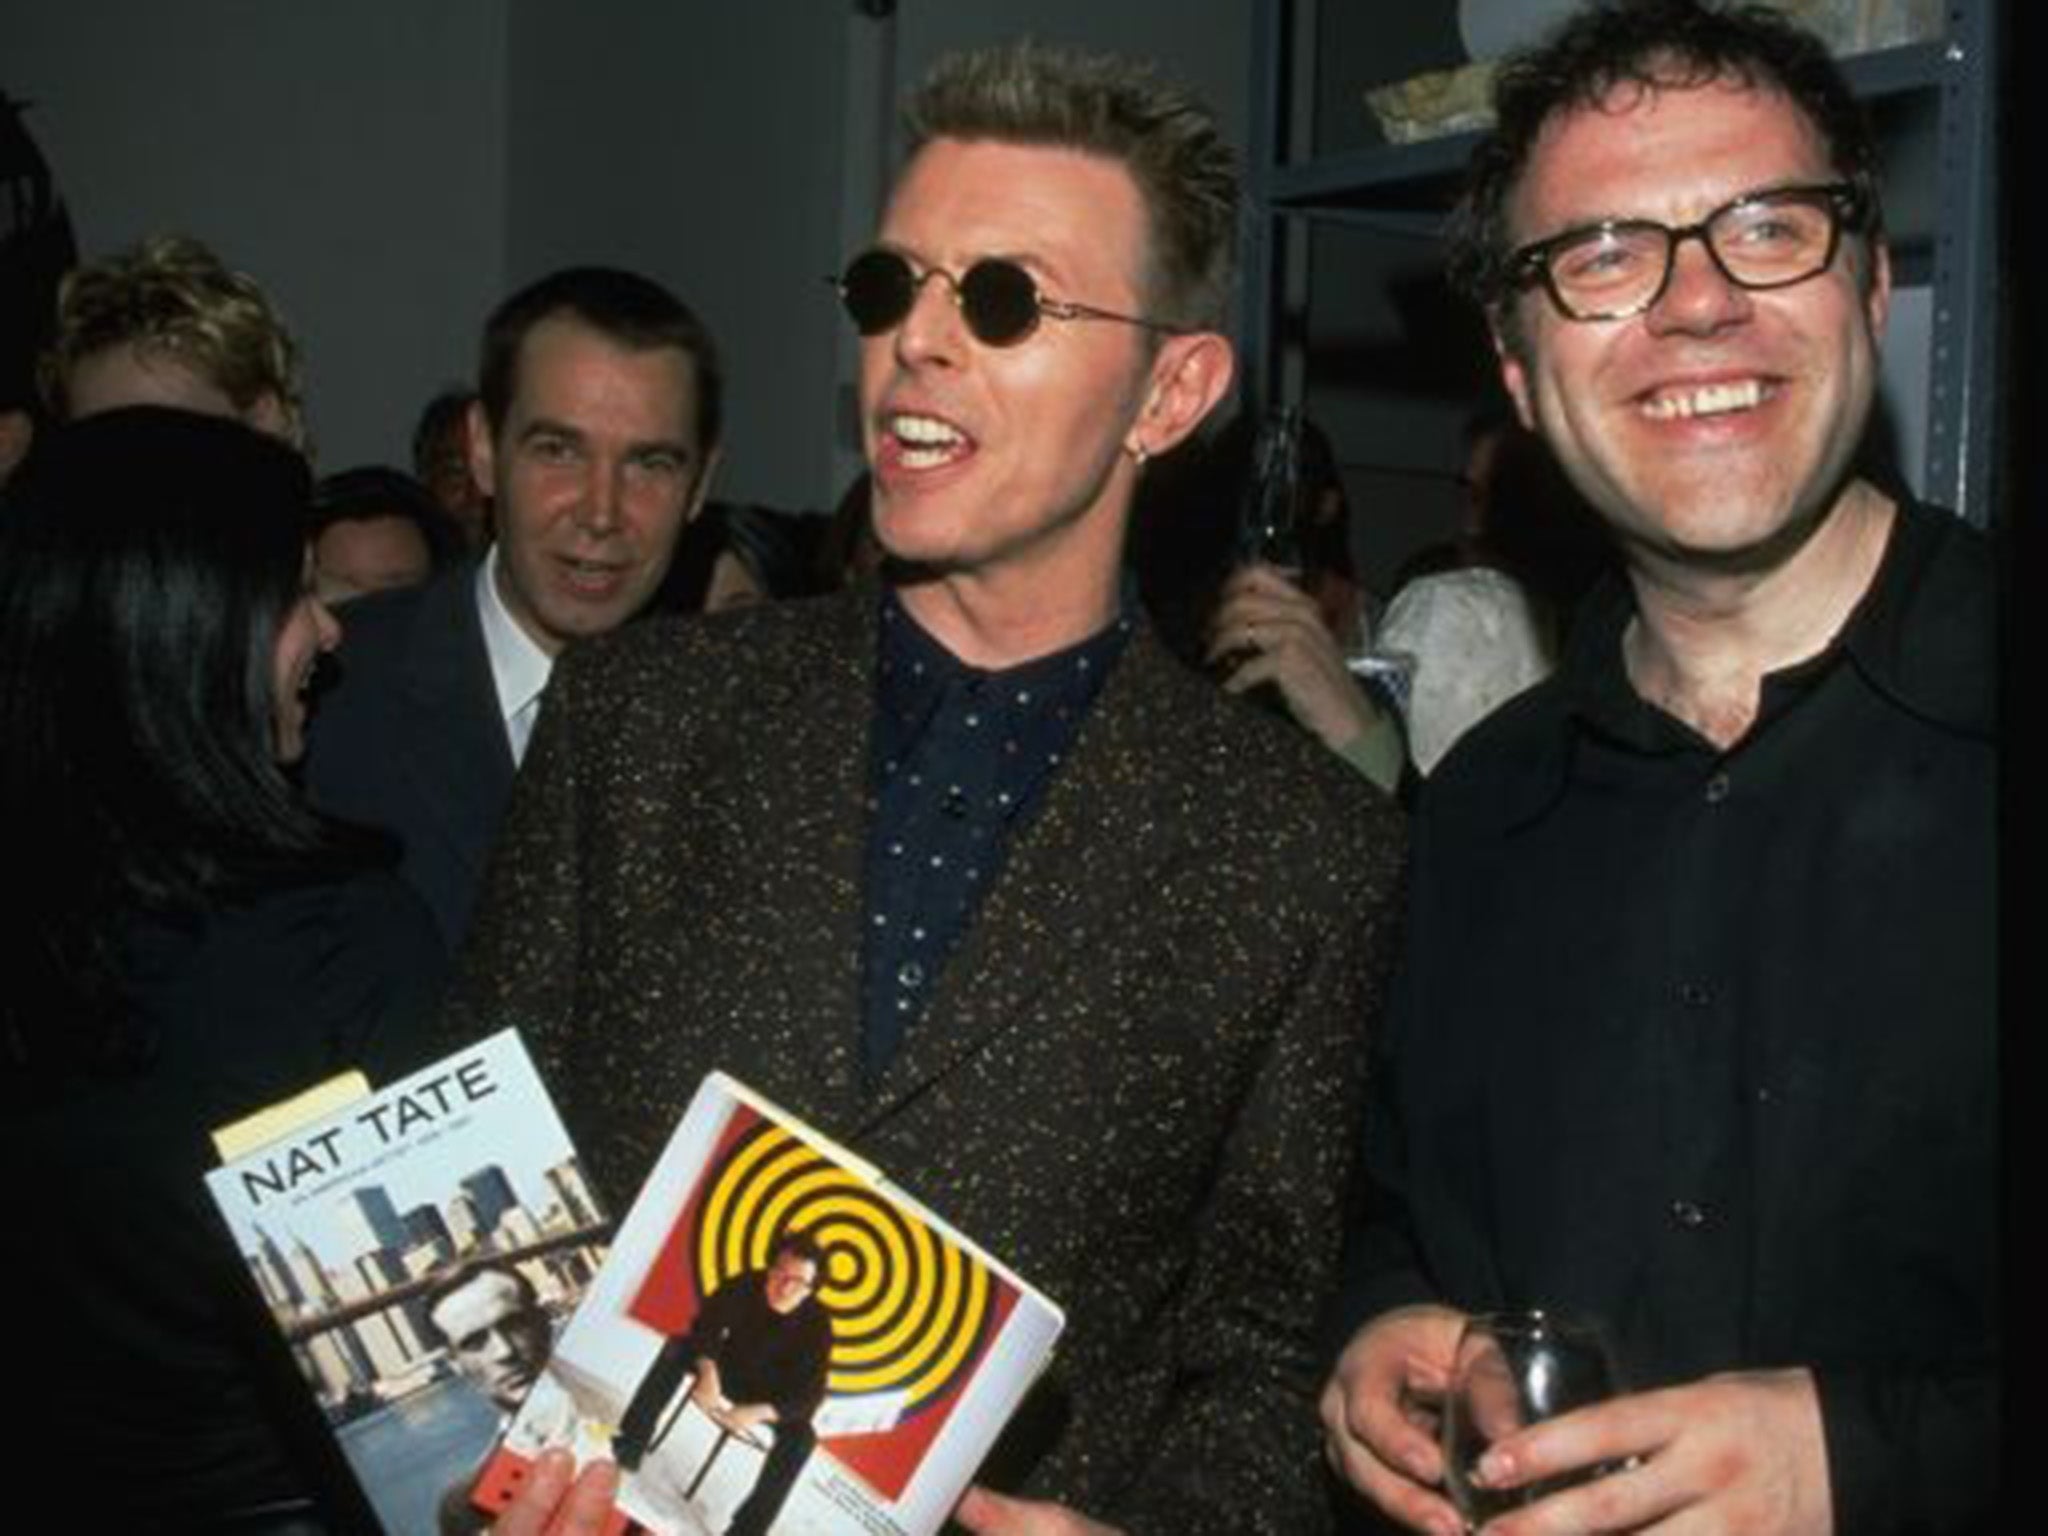 Jeff Koons, David Bowie and William Boyd in 1998